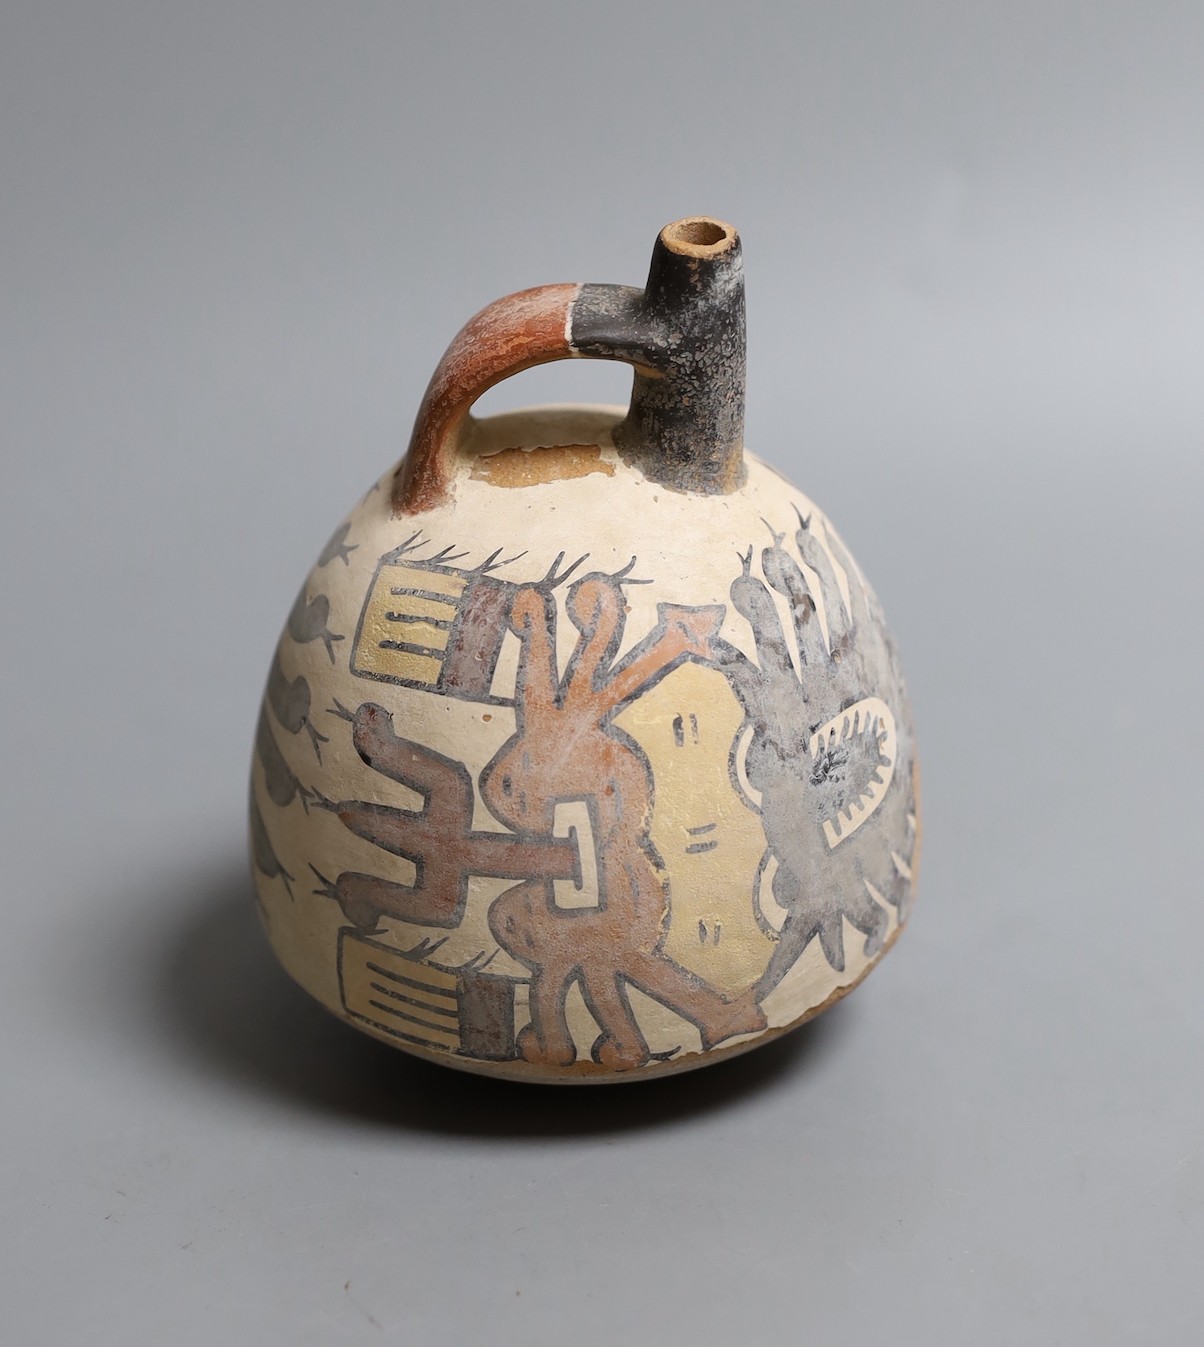 A Nazca Culture pottery vessel, Peru c. 300-600AD, 12cm high. provenance Sotheby’s valuation letter dating to April 1985.